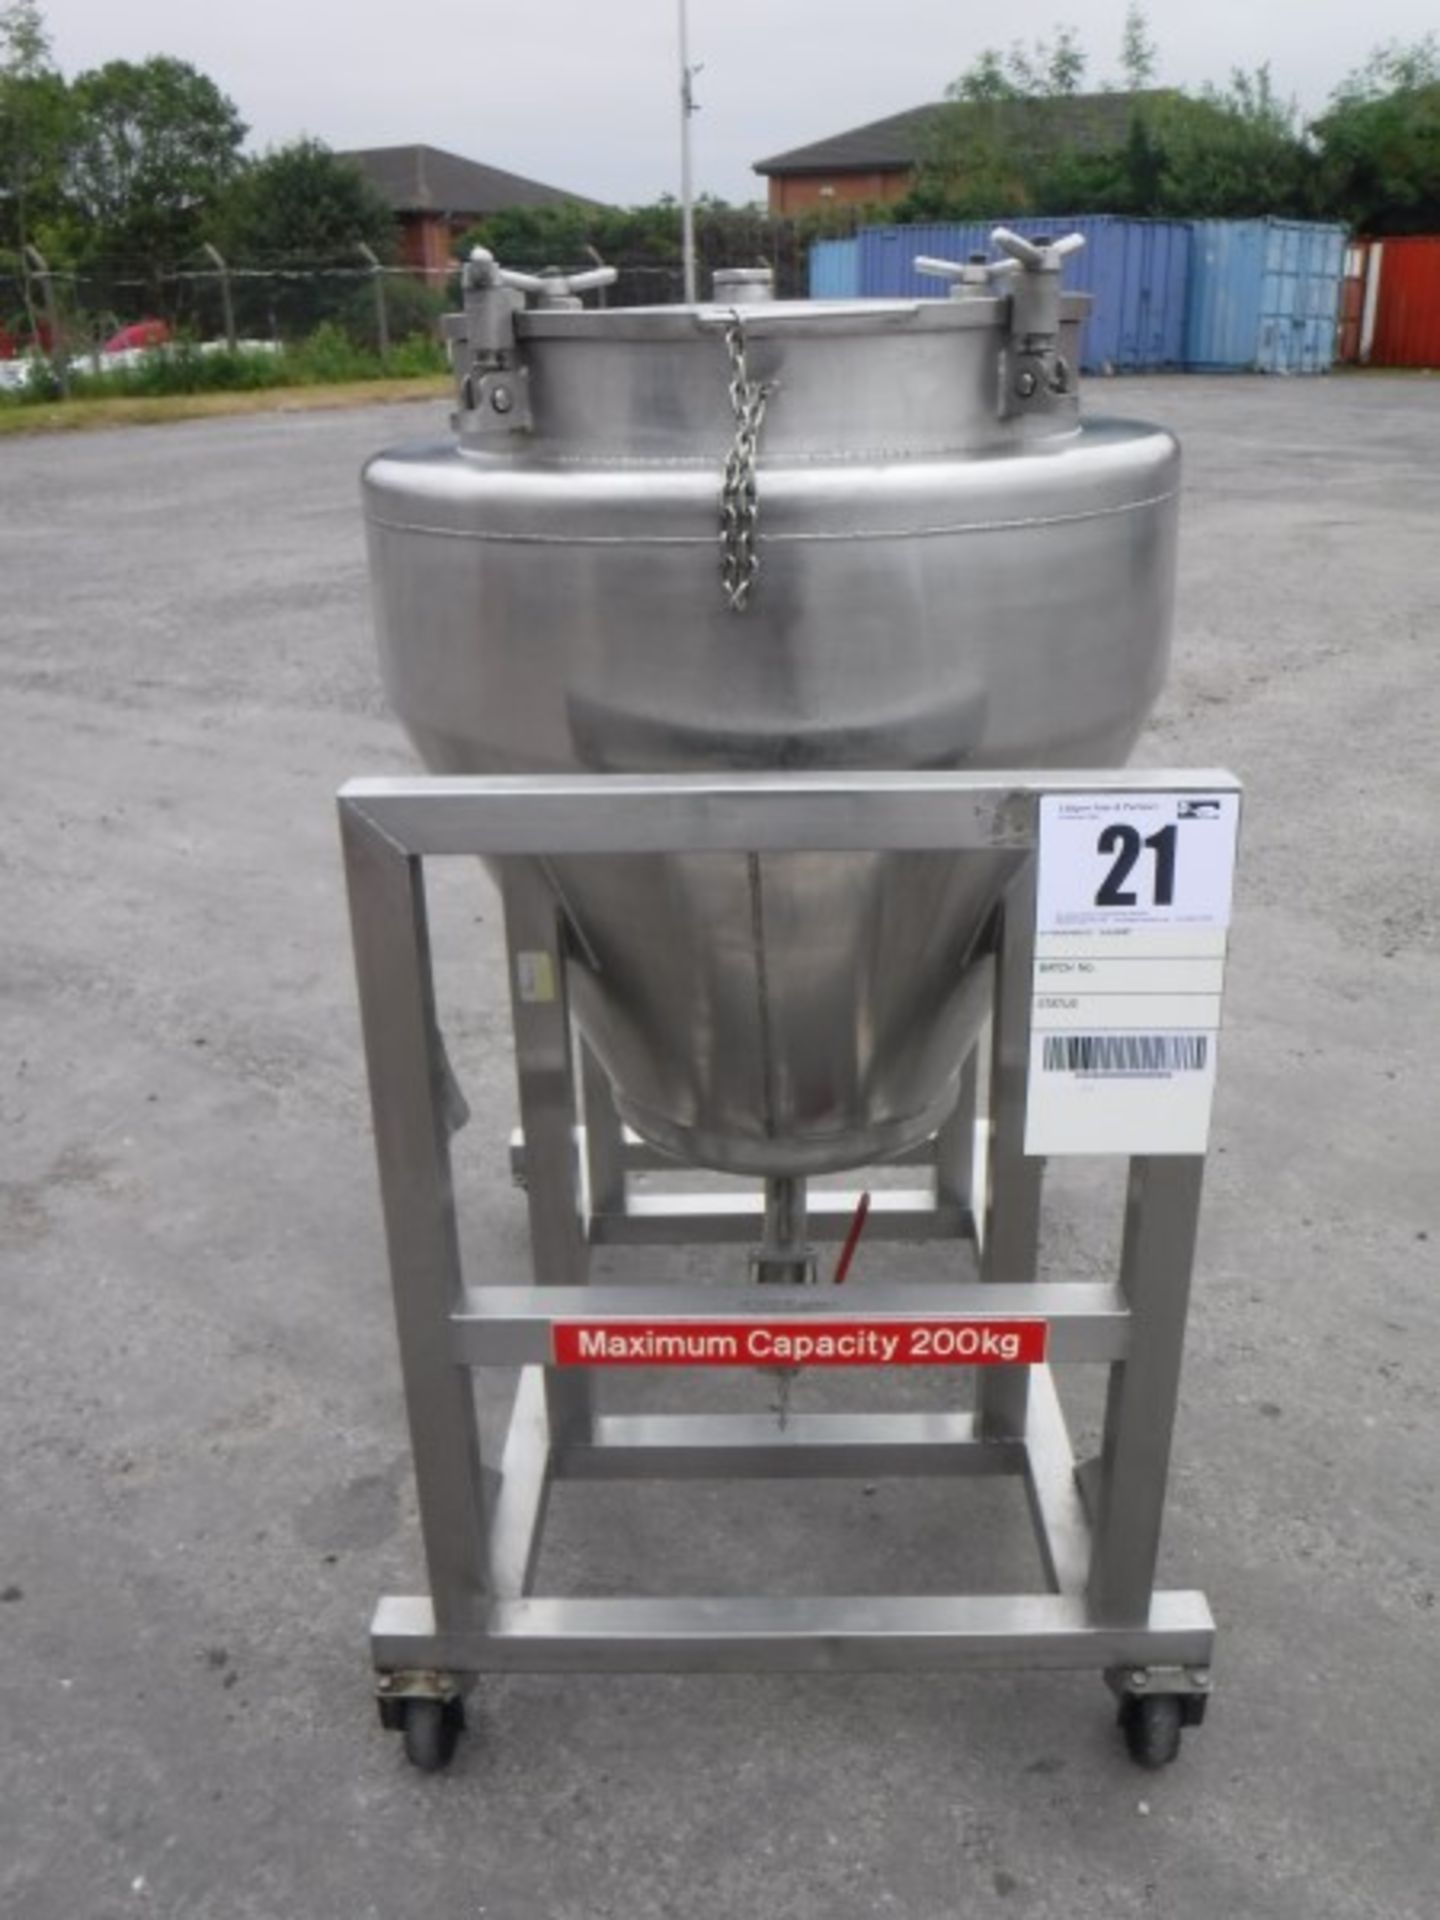 Stainless Steel 150 Litre Mobile Vessel, Outlet 1 1/2 inch RJT, Overall Height : 1400 mm, fitted